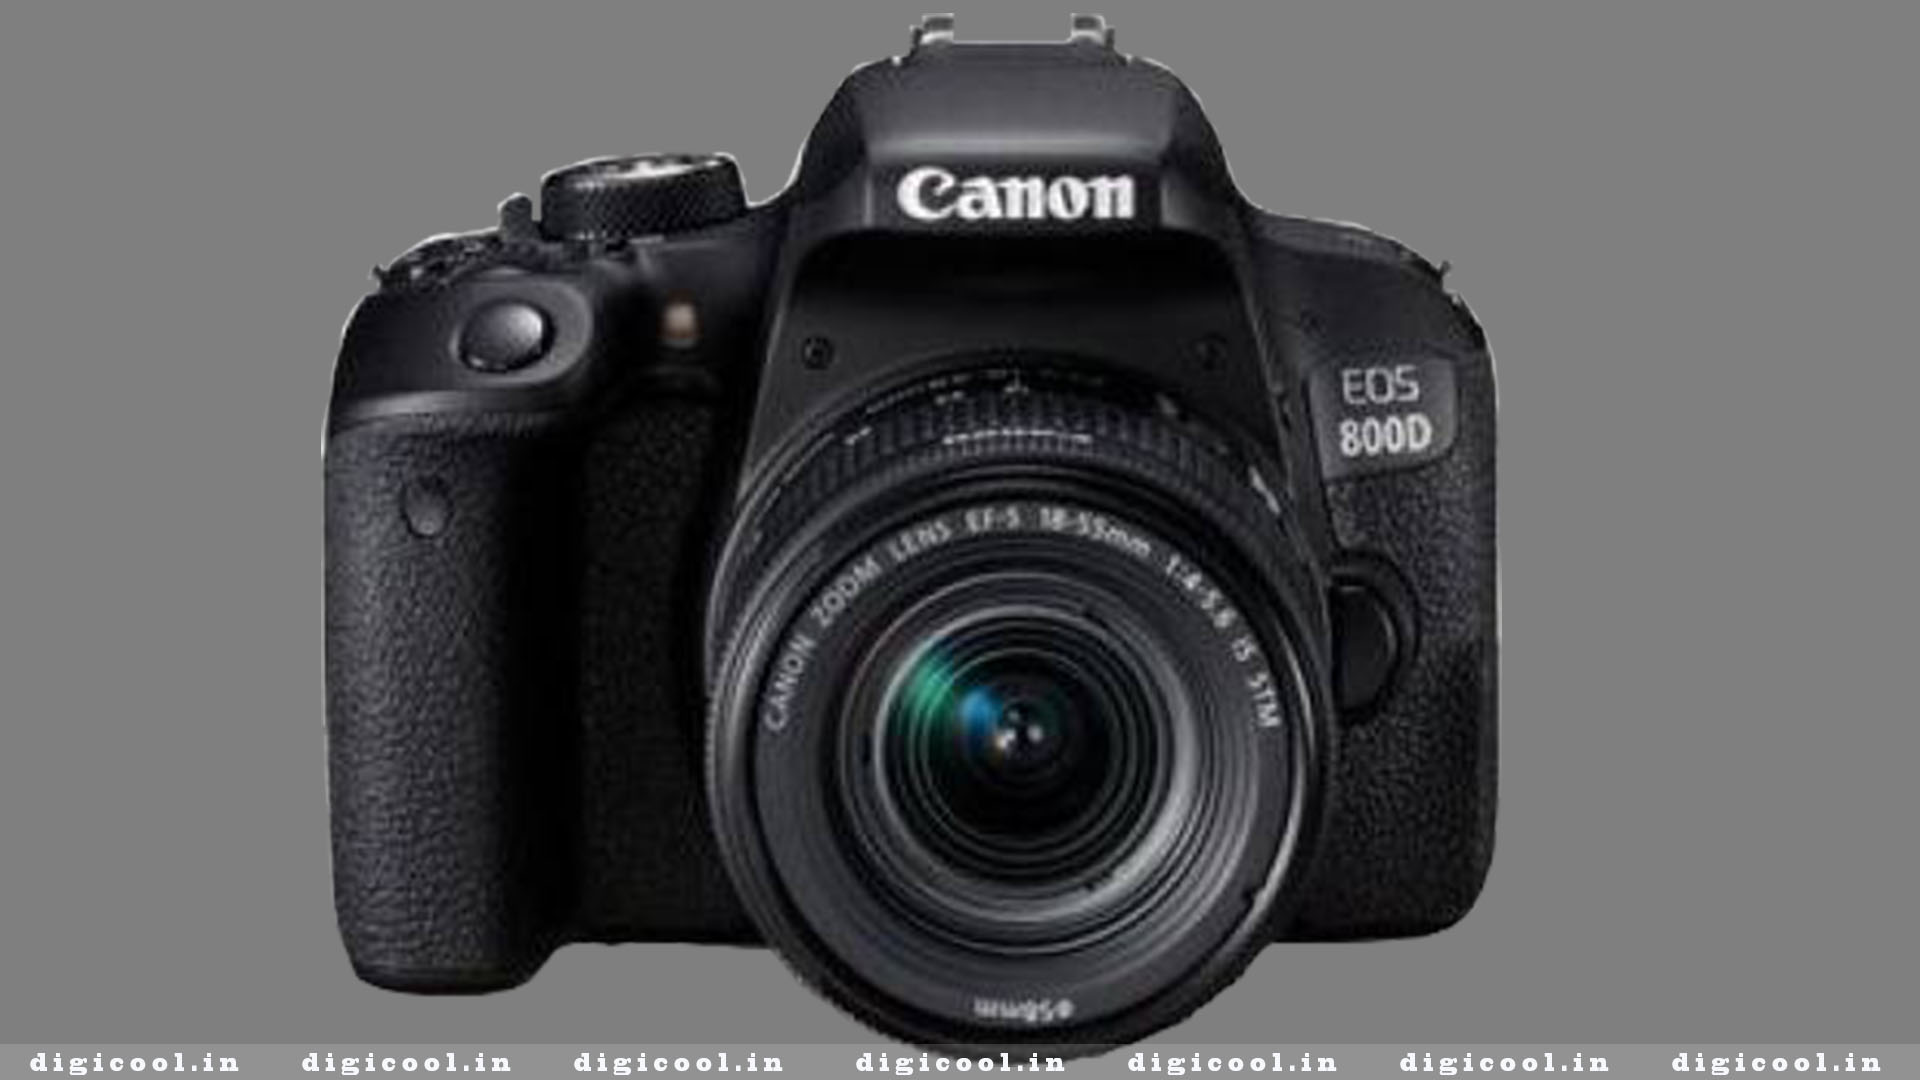 Canon EOS 800D DSLR Camera in India 2020 Review